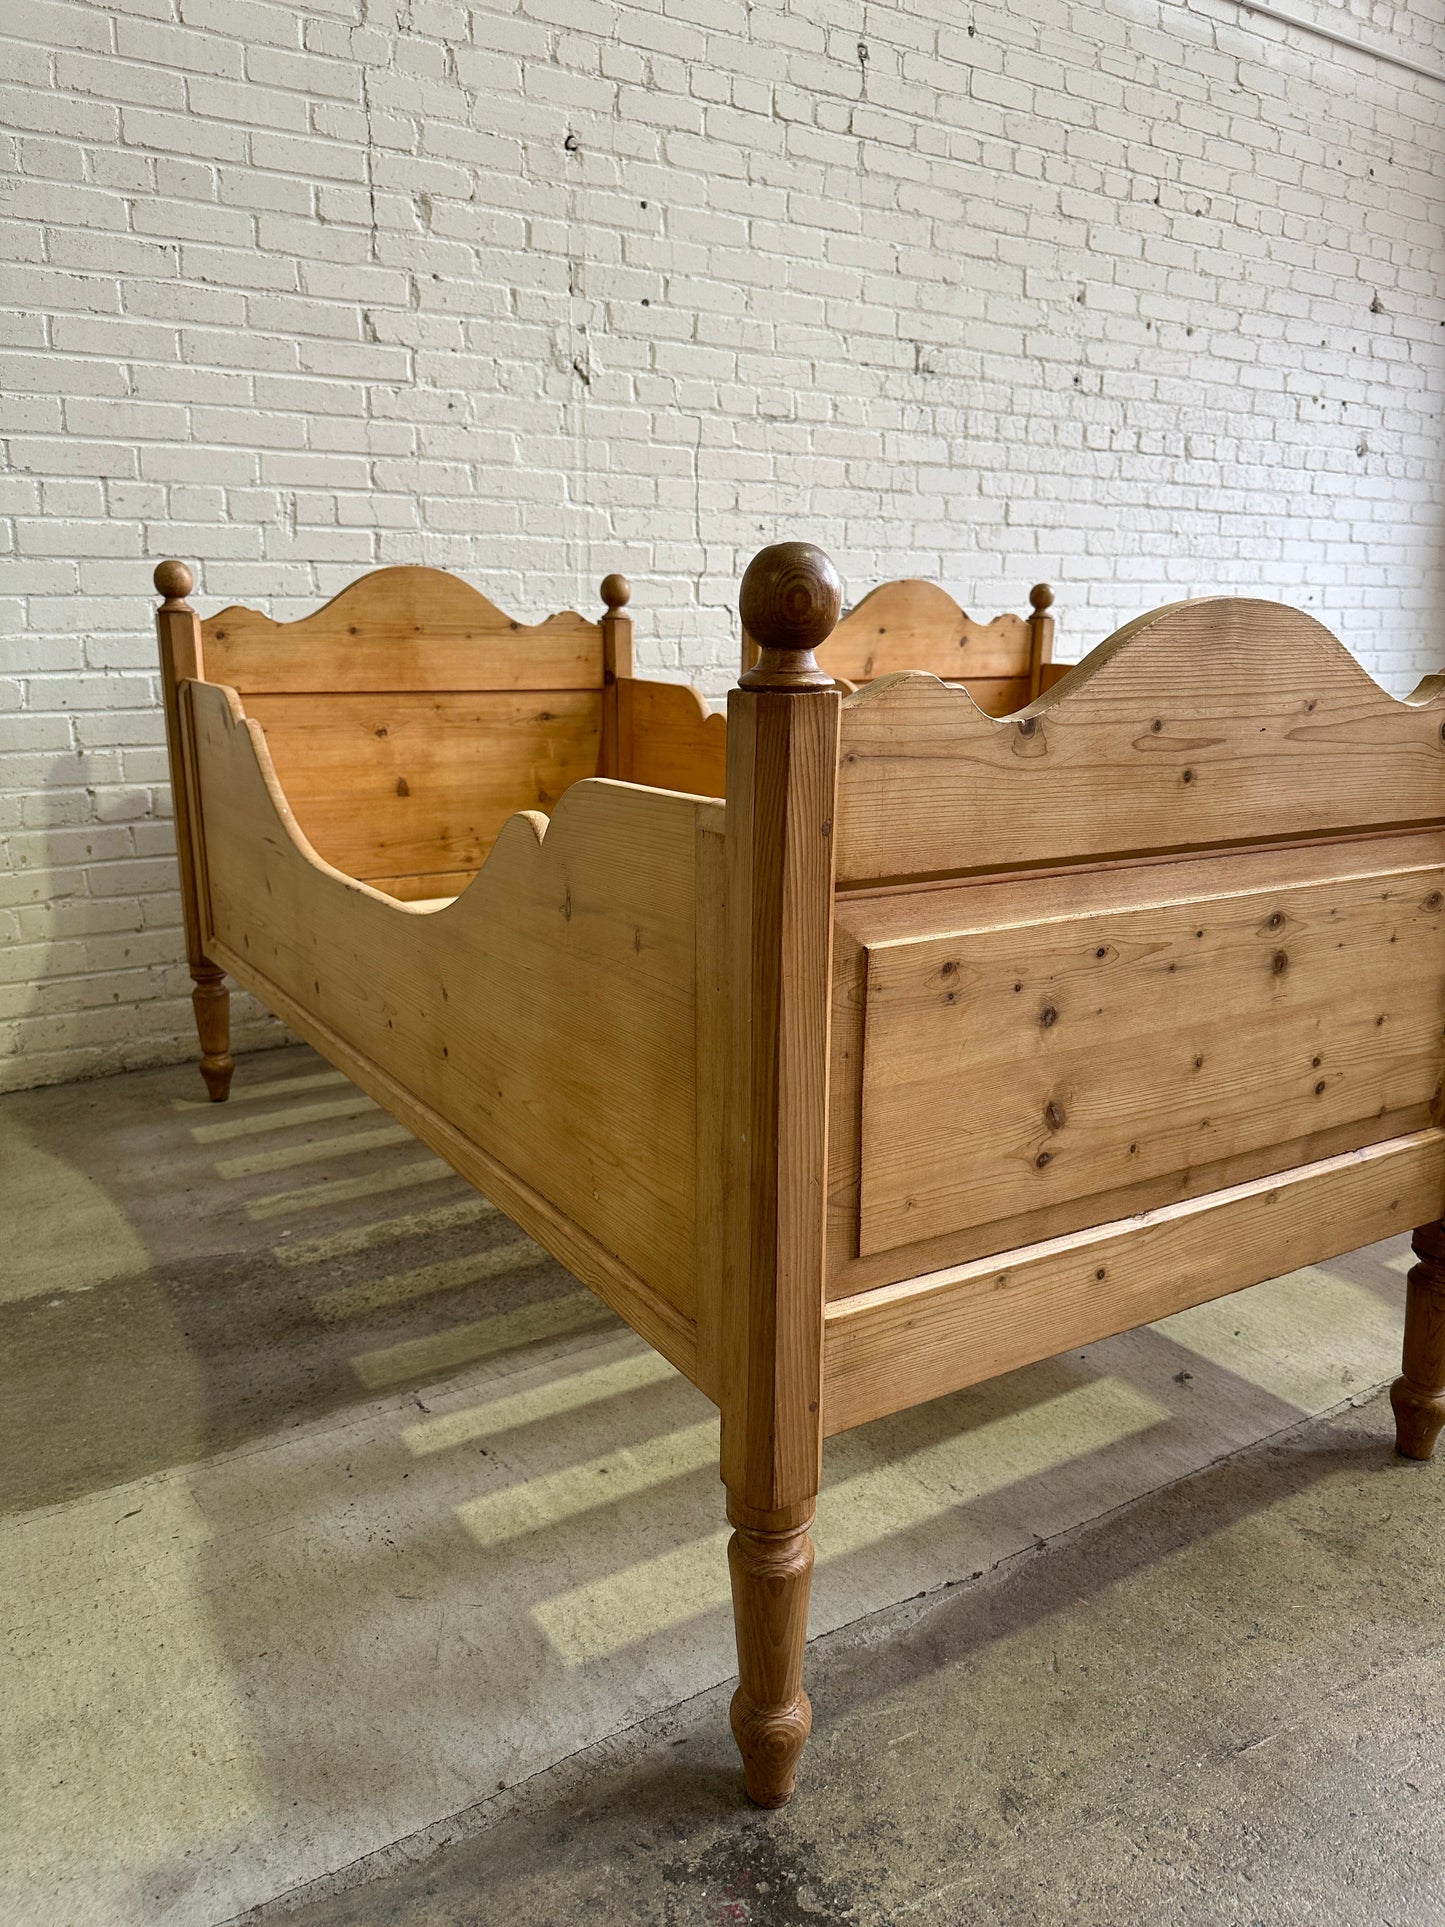 A Pair of Antique Pine Sleigh Beds c. 1900